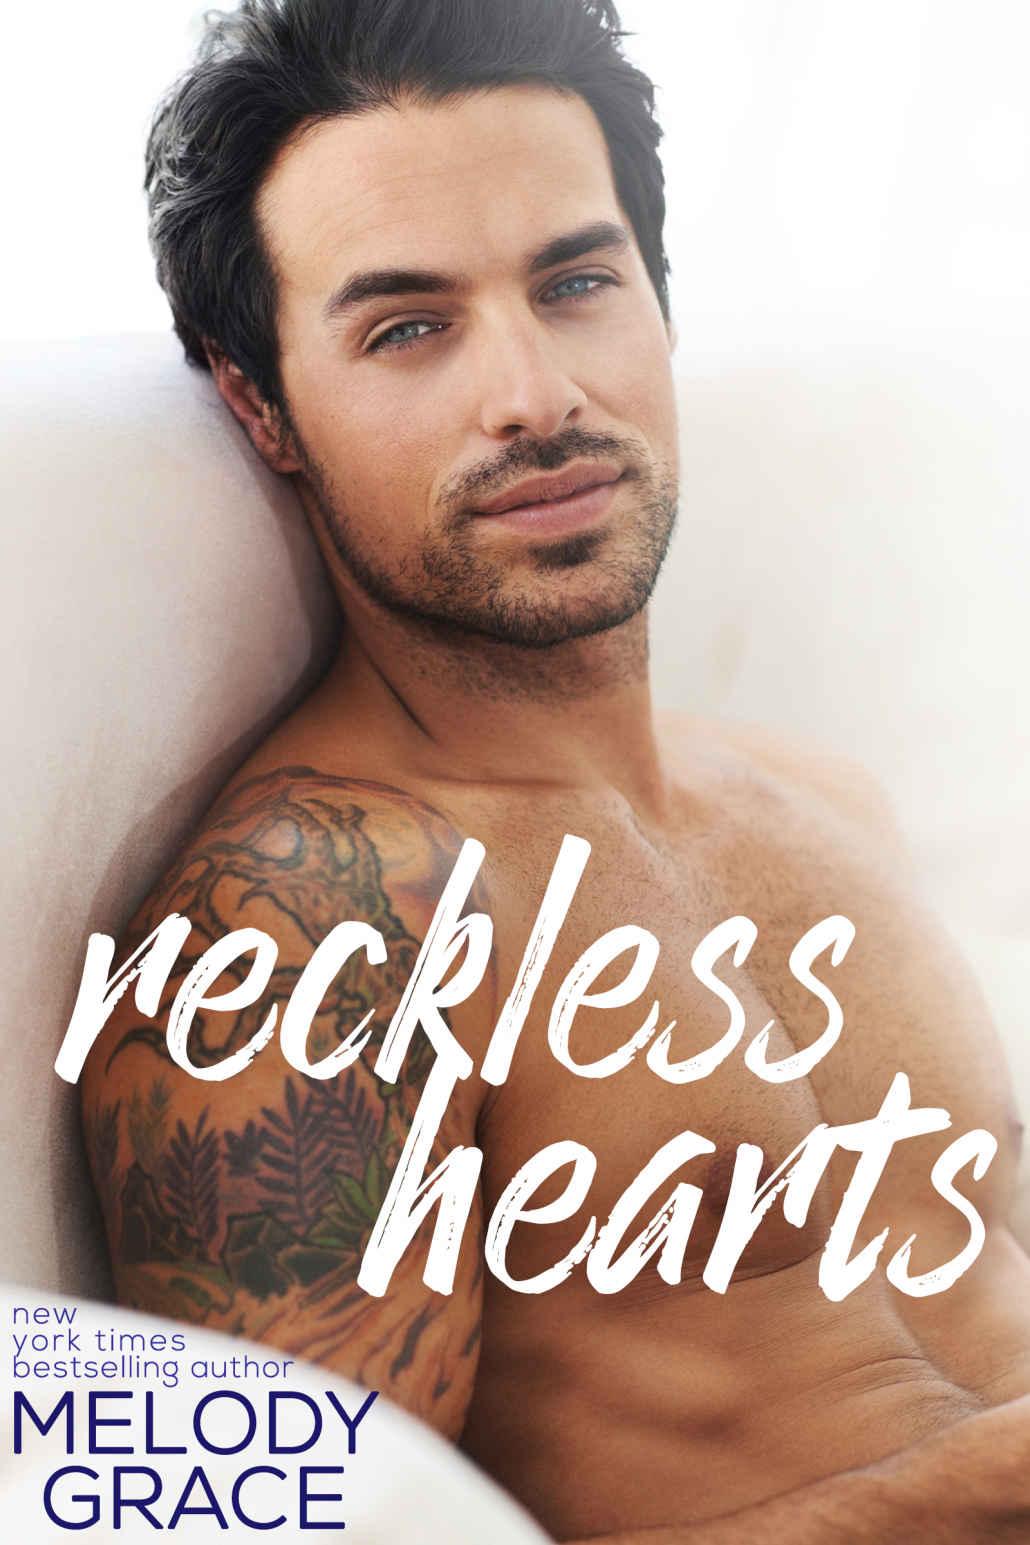 Reckless Hearts by Melody Grace